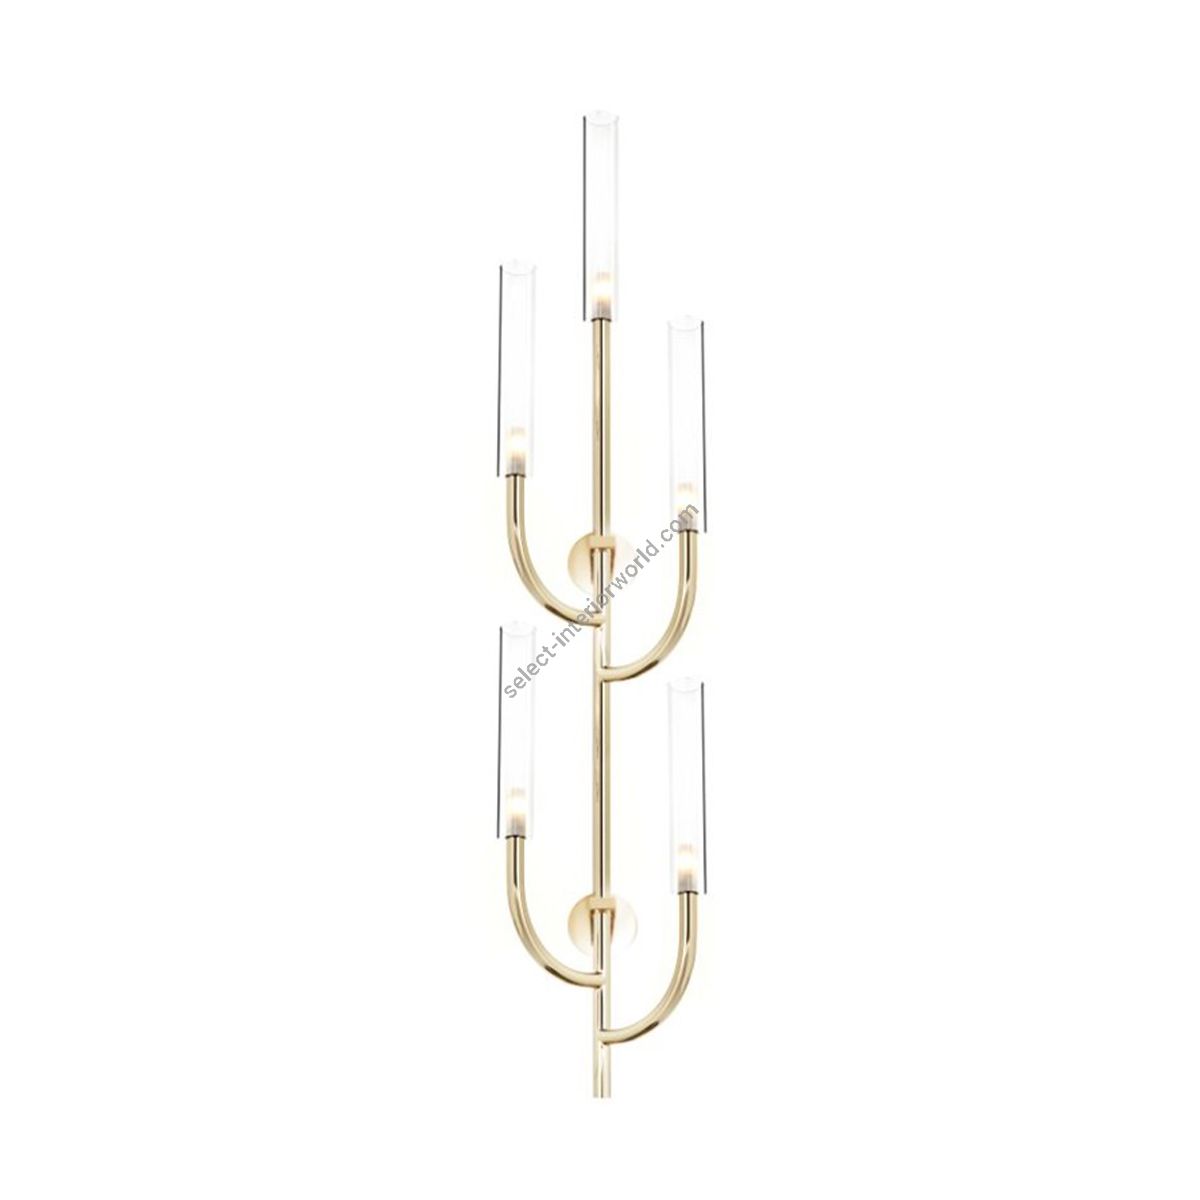 Modern large Decorative Wall Sconce, 5 Lights by Il Paralume Marina